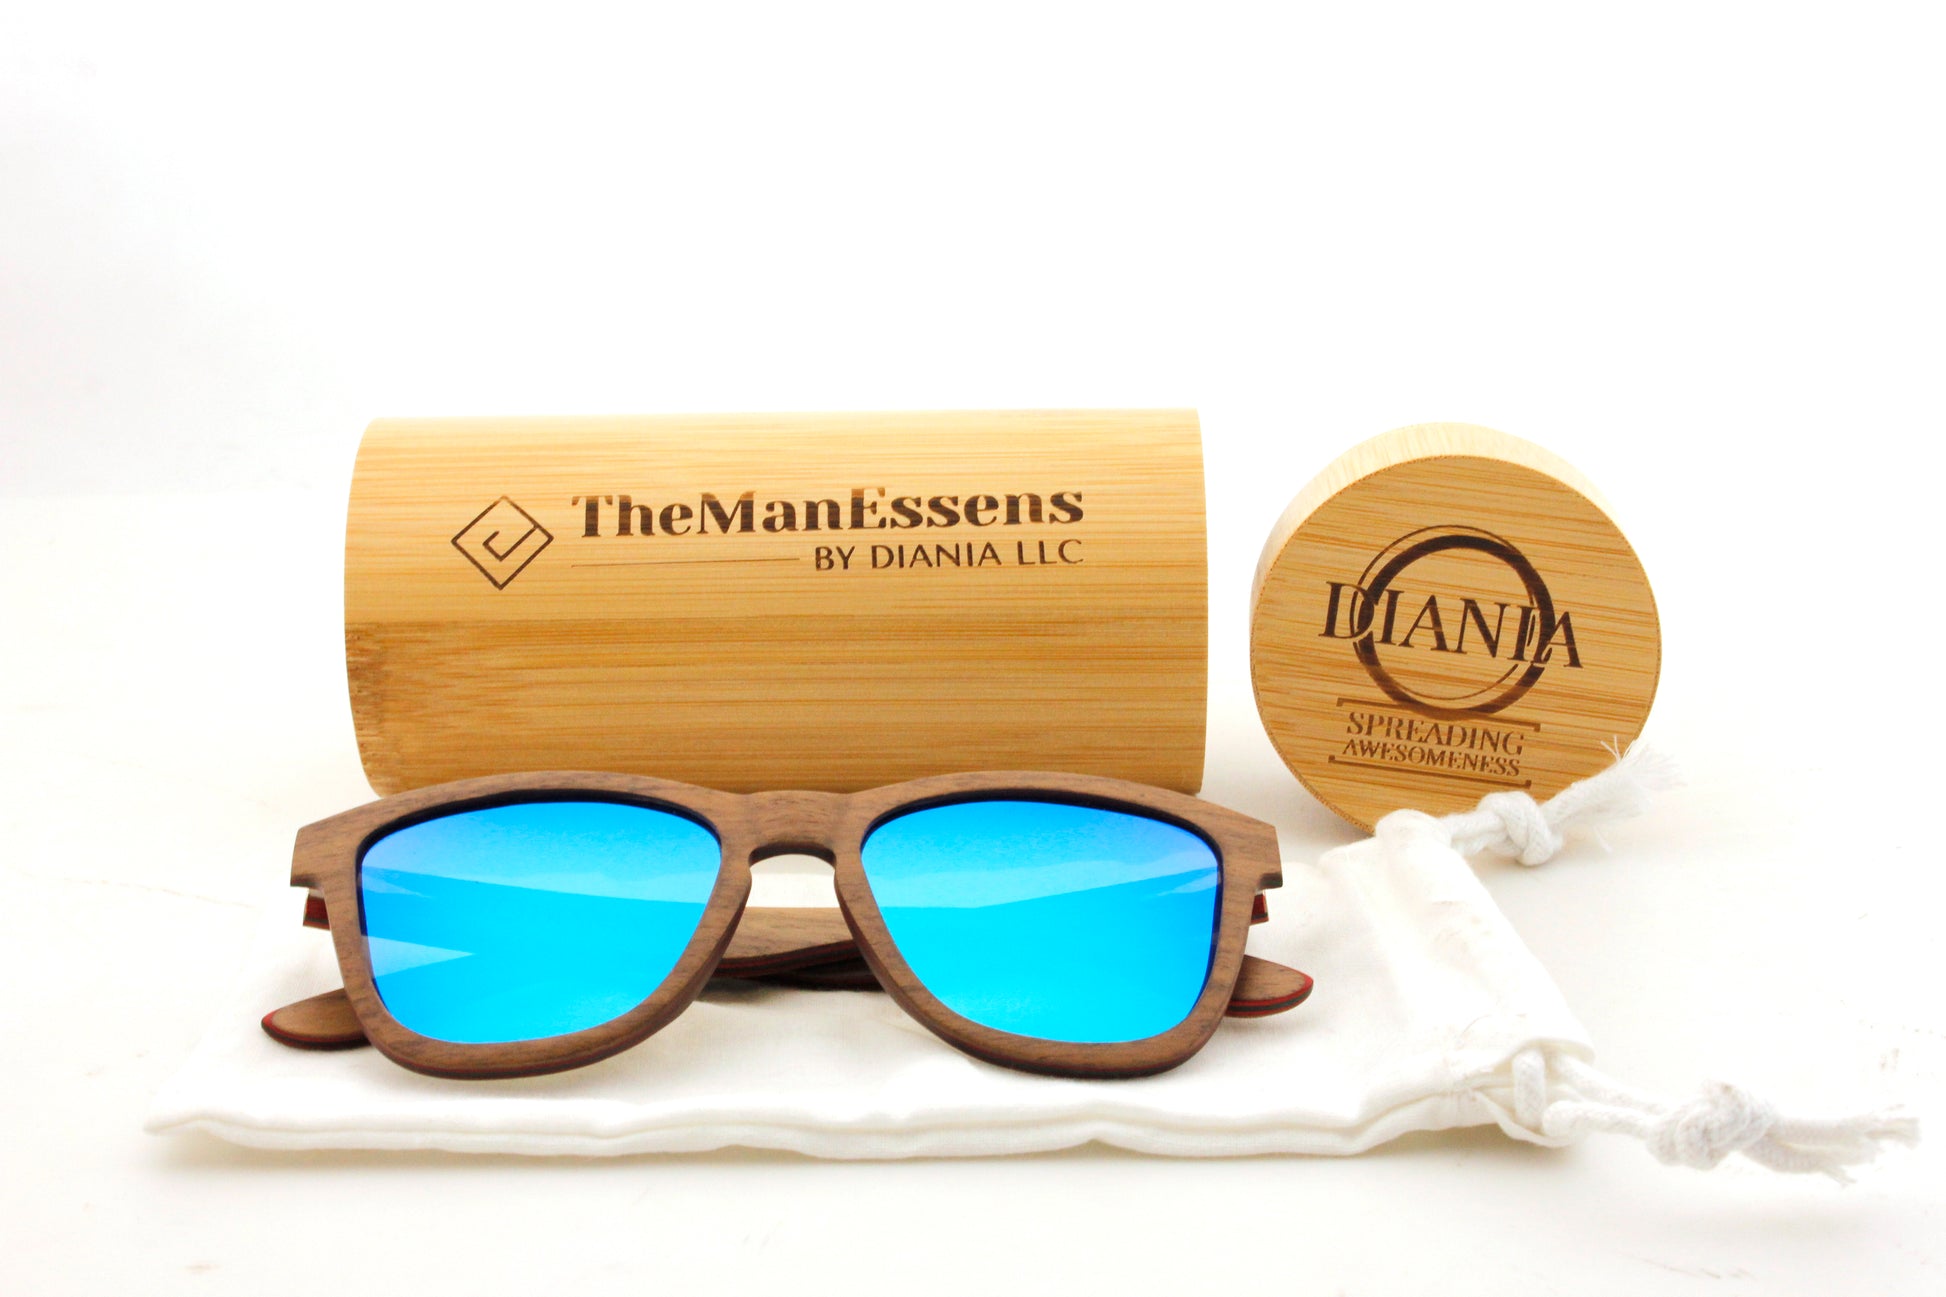 Menejador Layered Walnut Wood Sunglasses on cotton back in front of bamboo cilinder case